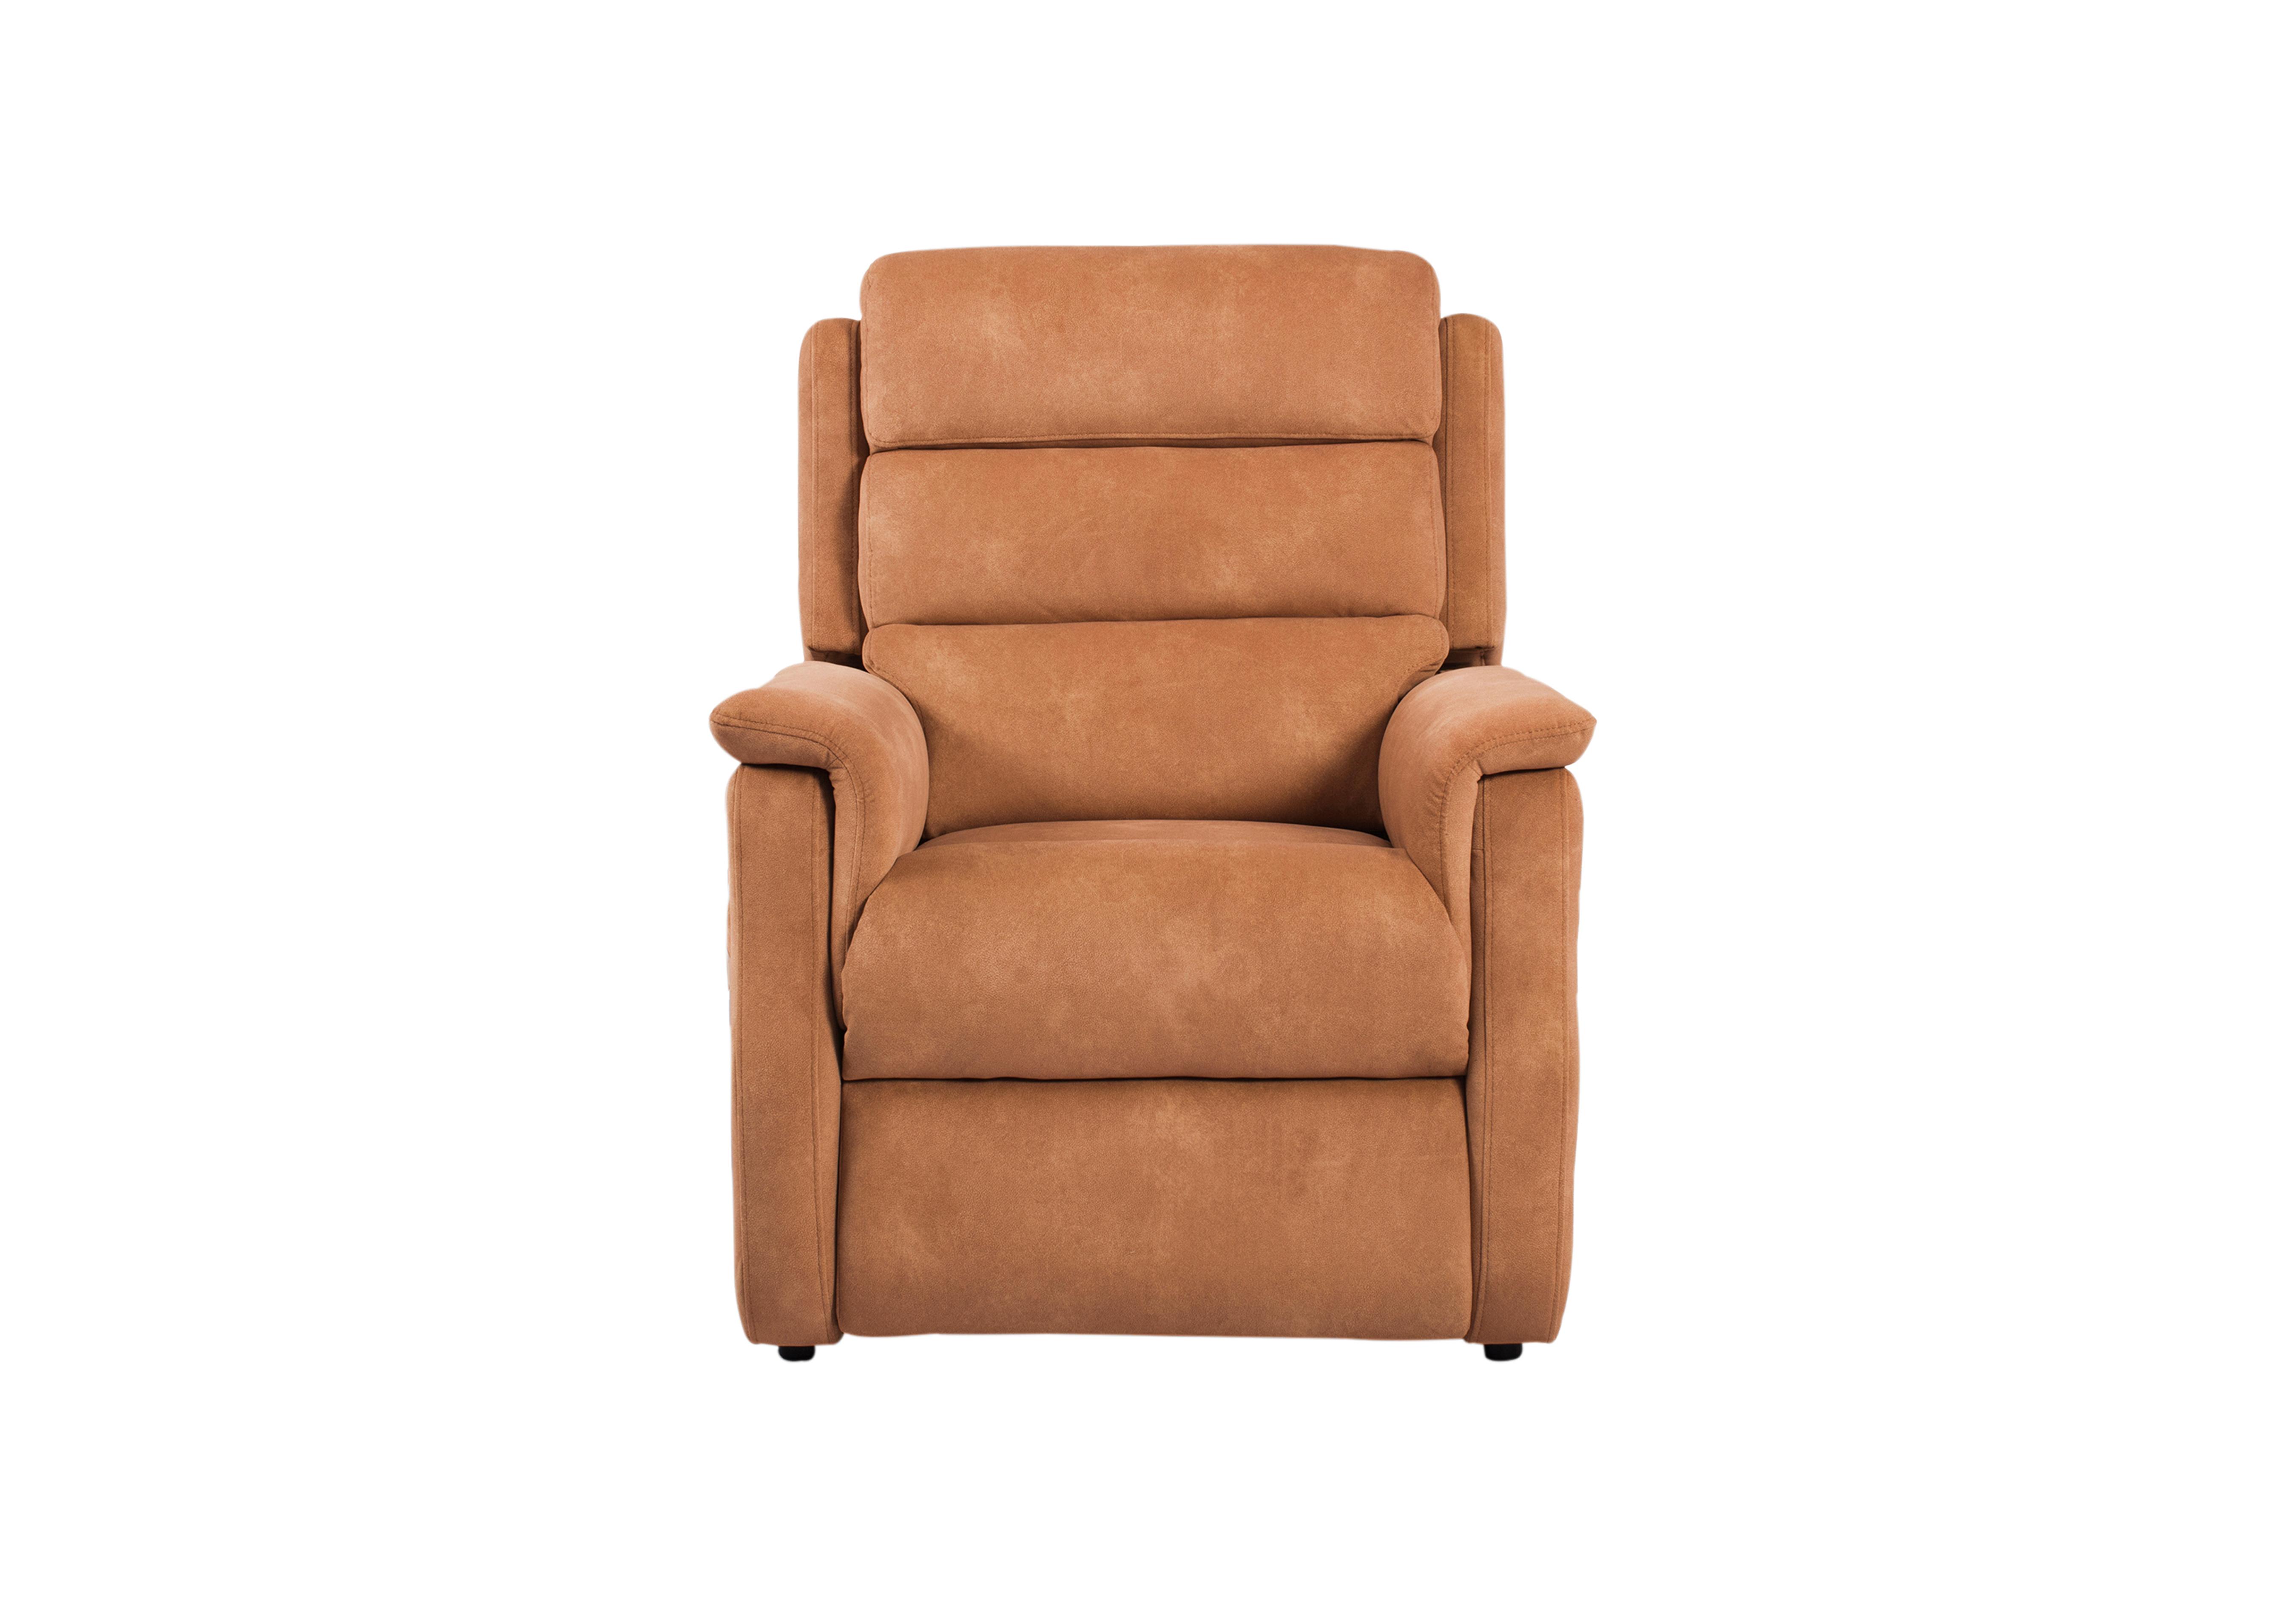 My Chair McCoy Fabric Lift and Rise Chair in 43509 Pumpkin Dexter 09 on Furniture Village